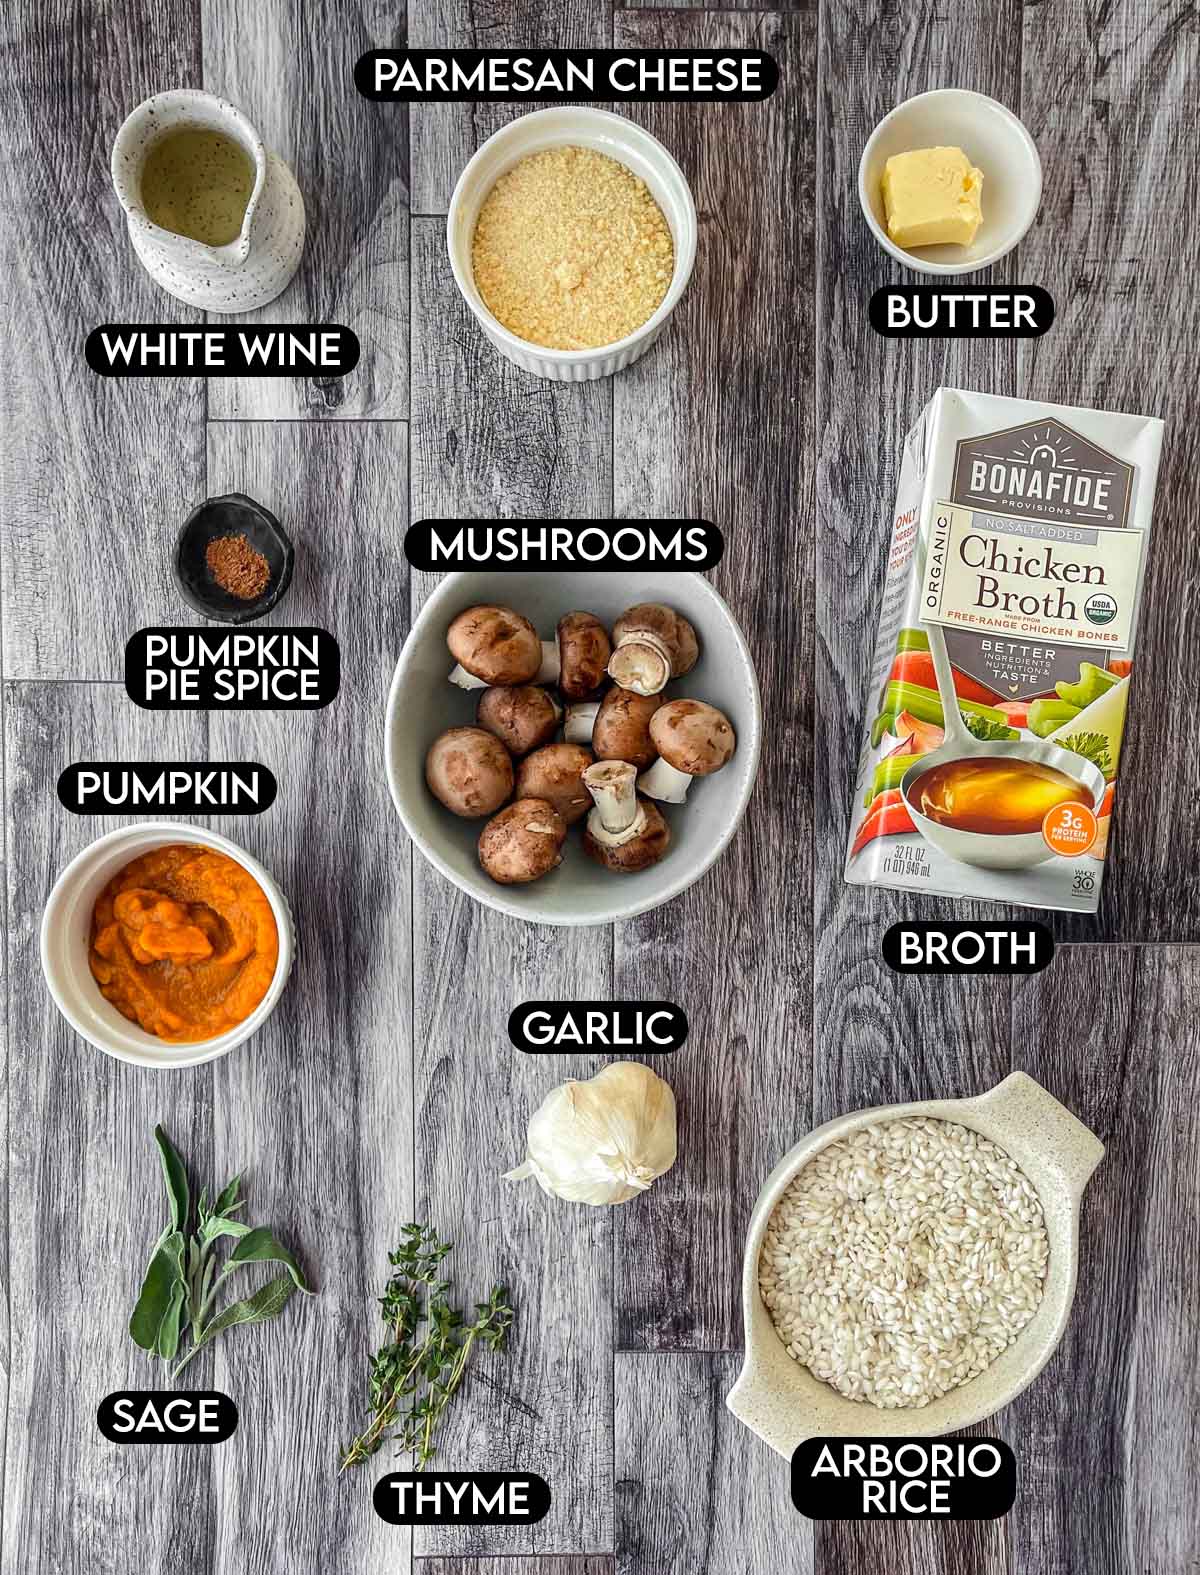 Labeled ingredients for pumpkin and mushroom risotto: parmesan cheese, white wine, mushroom, butter, pumpkin pie spice, pumpkin, garlic, broth, sage, thyme, arborio rice.